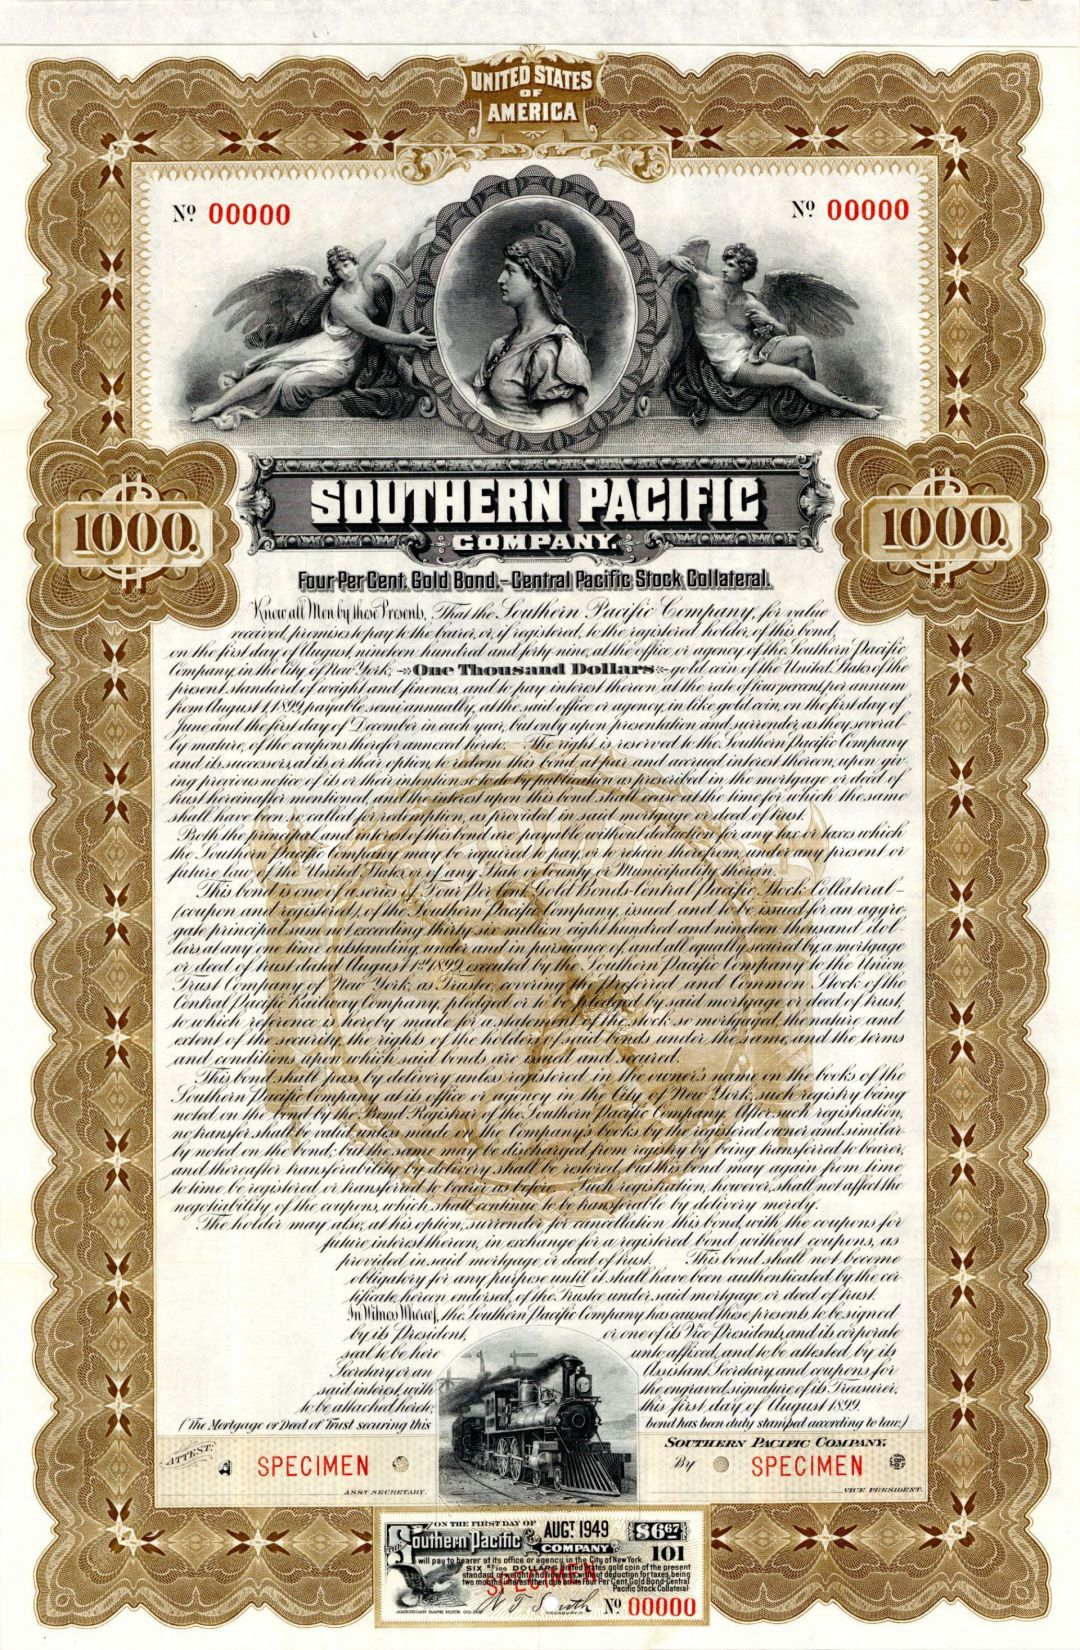 Southern Pacific Co. - $1,000 or $500 Specimen Bond